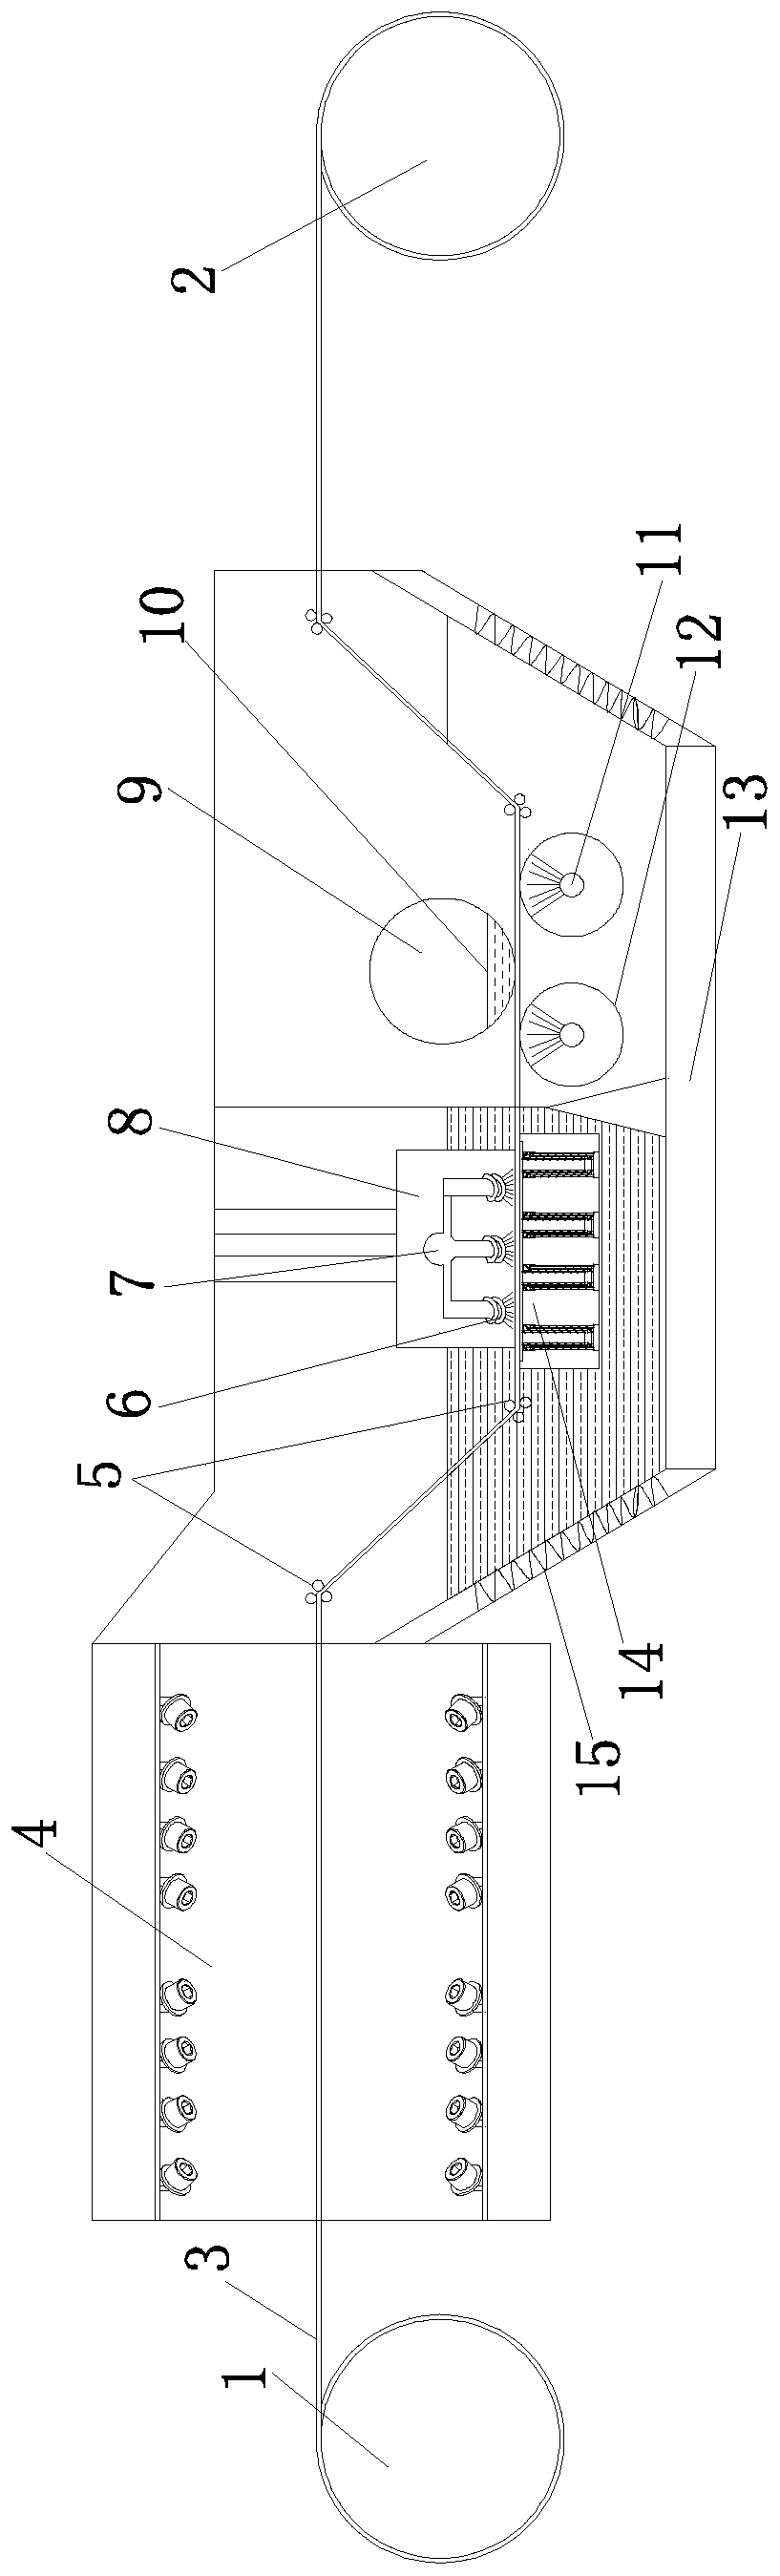 Liquid bismuth alloy quenching device and technology